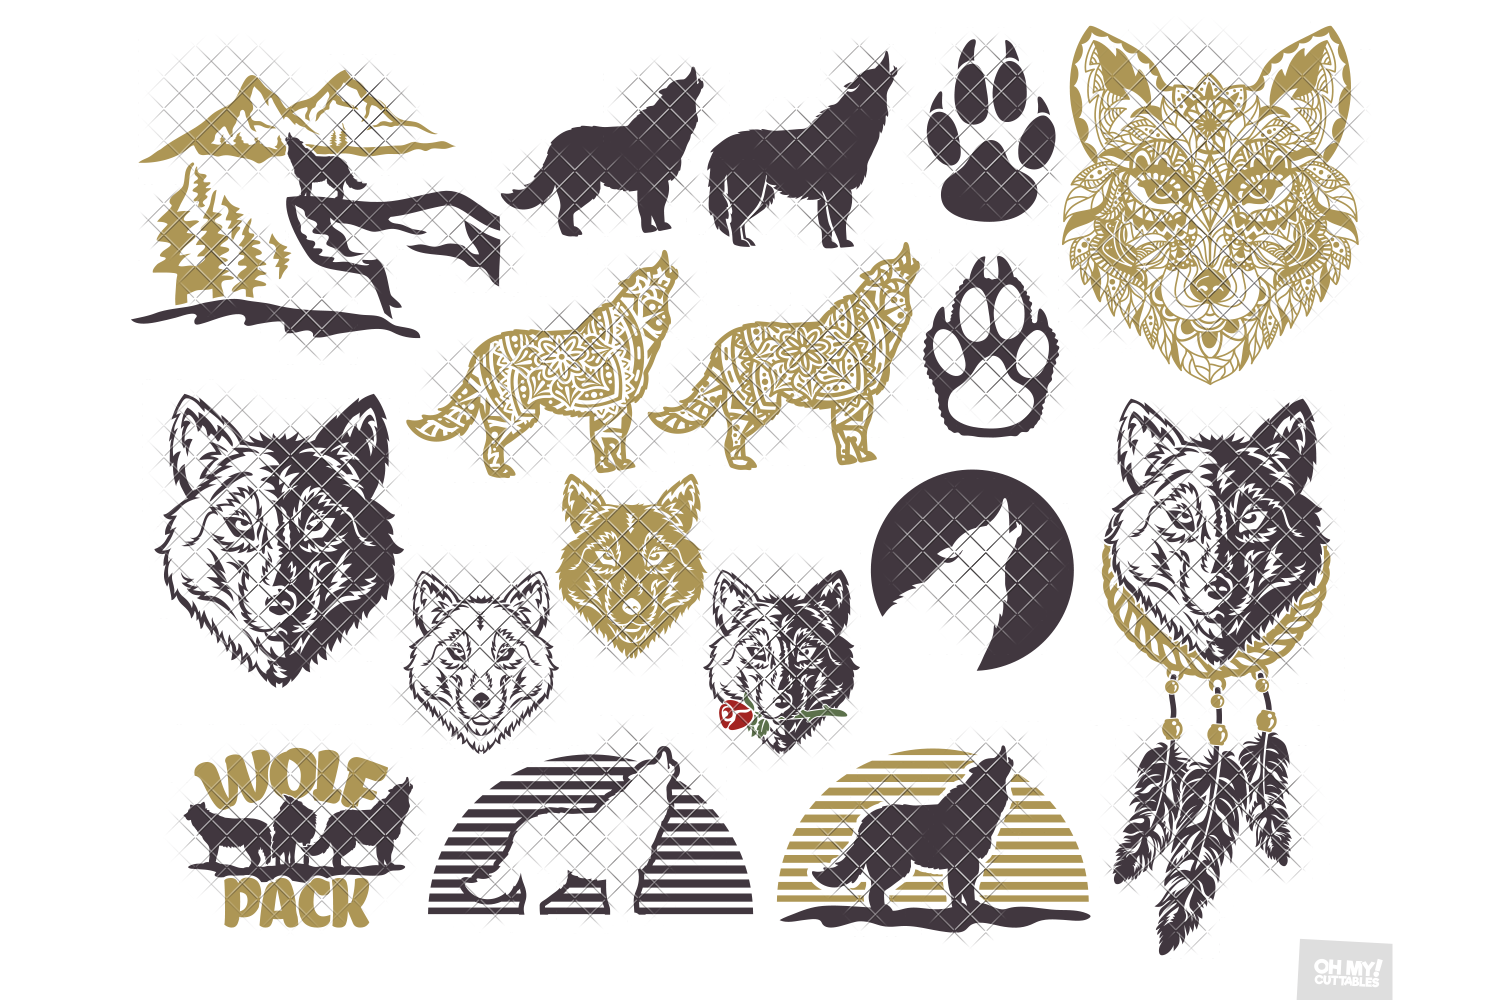 Download Wolf SVG Wolves Howl Silhouette in SVG, DXF, PNG, EPS, JPG